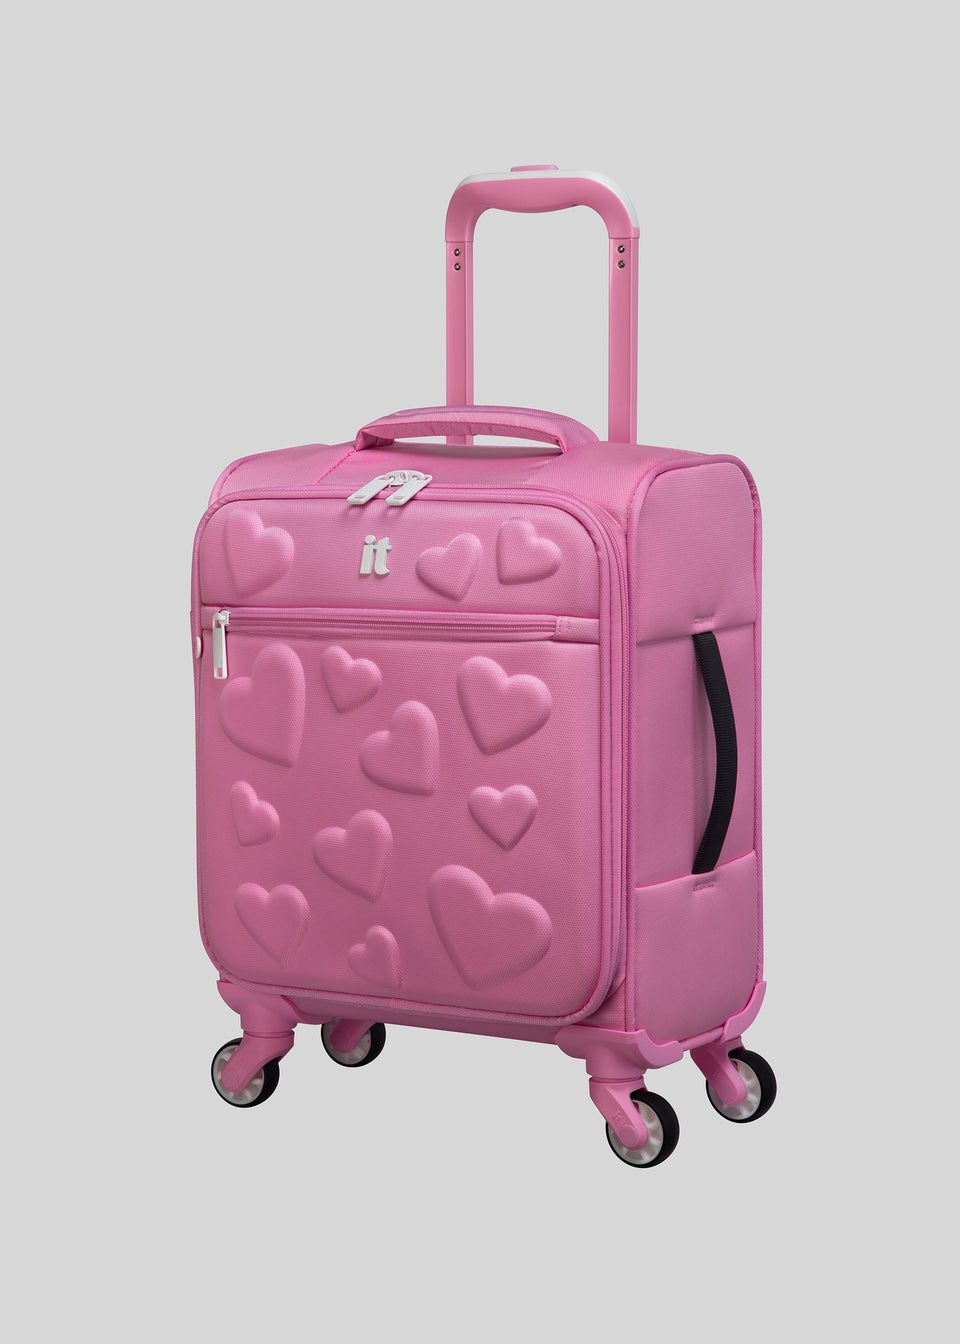 IT Luggage Pink Hearts Suitcase